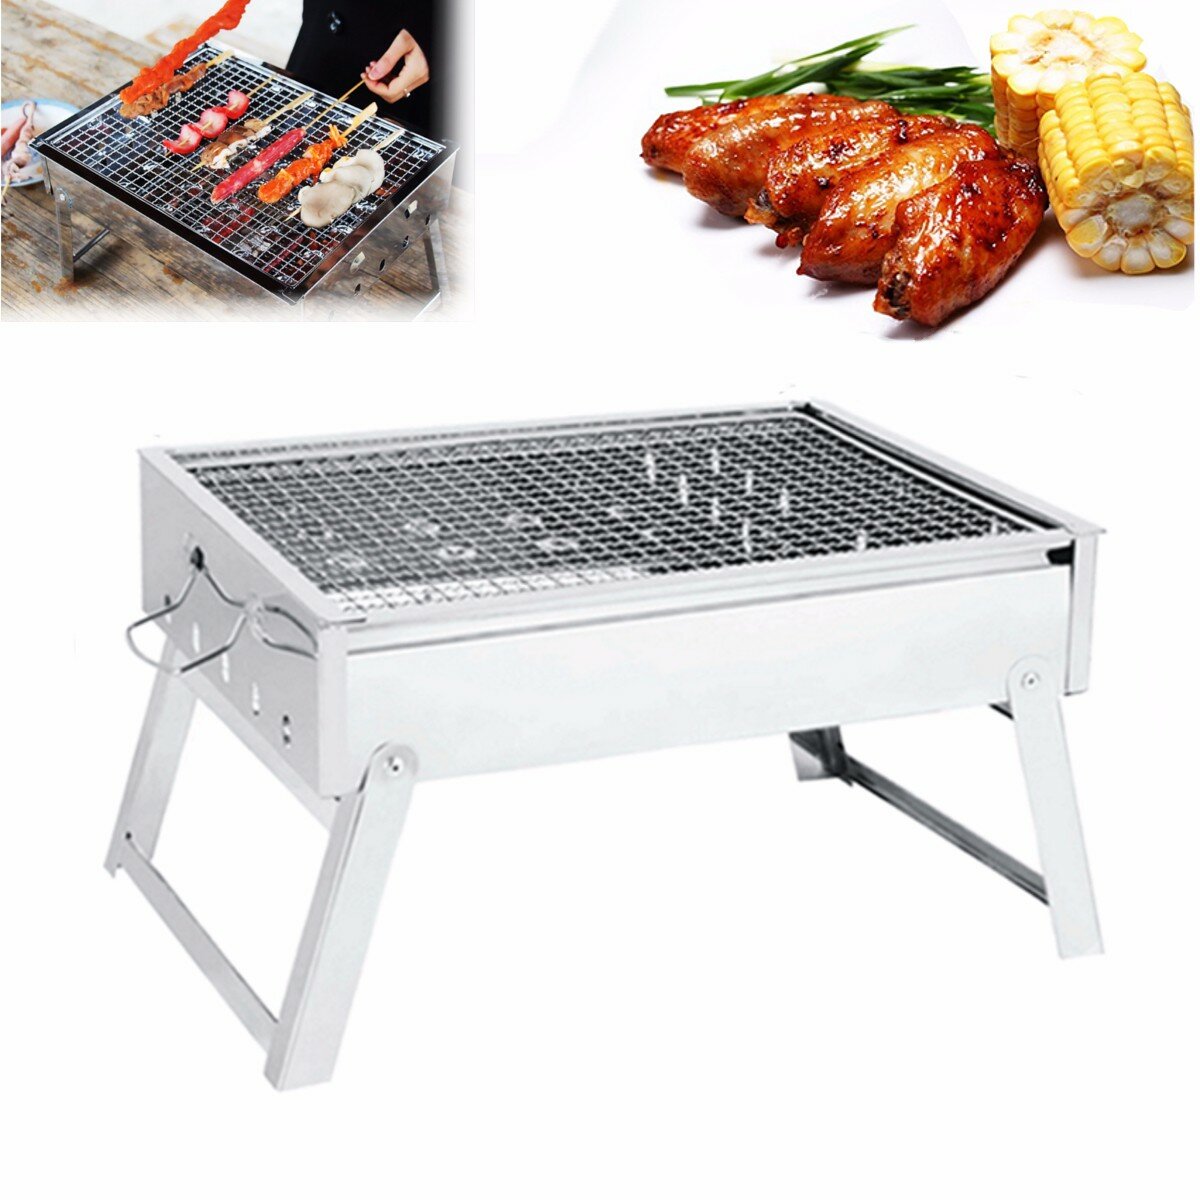 IPRee® Portable Folding Charcoal Stove Barbecue Oven Cooking Picnic Camping BBQ Grill